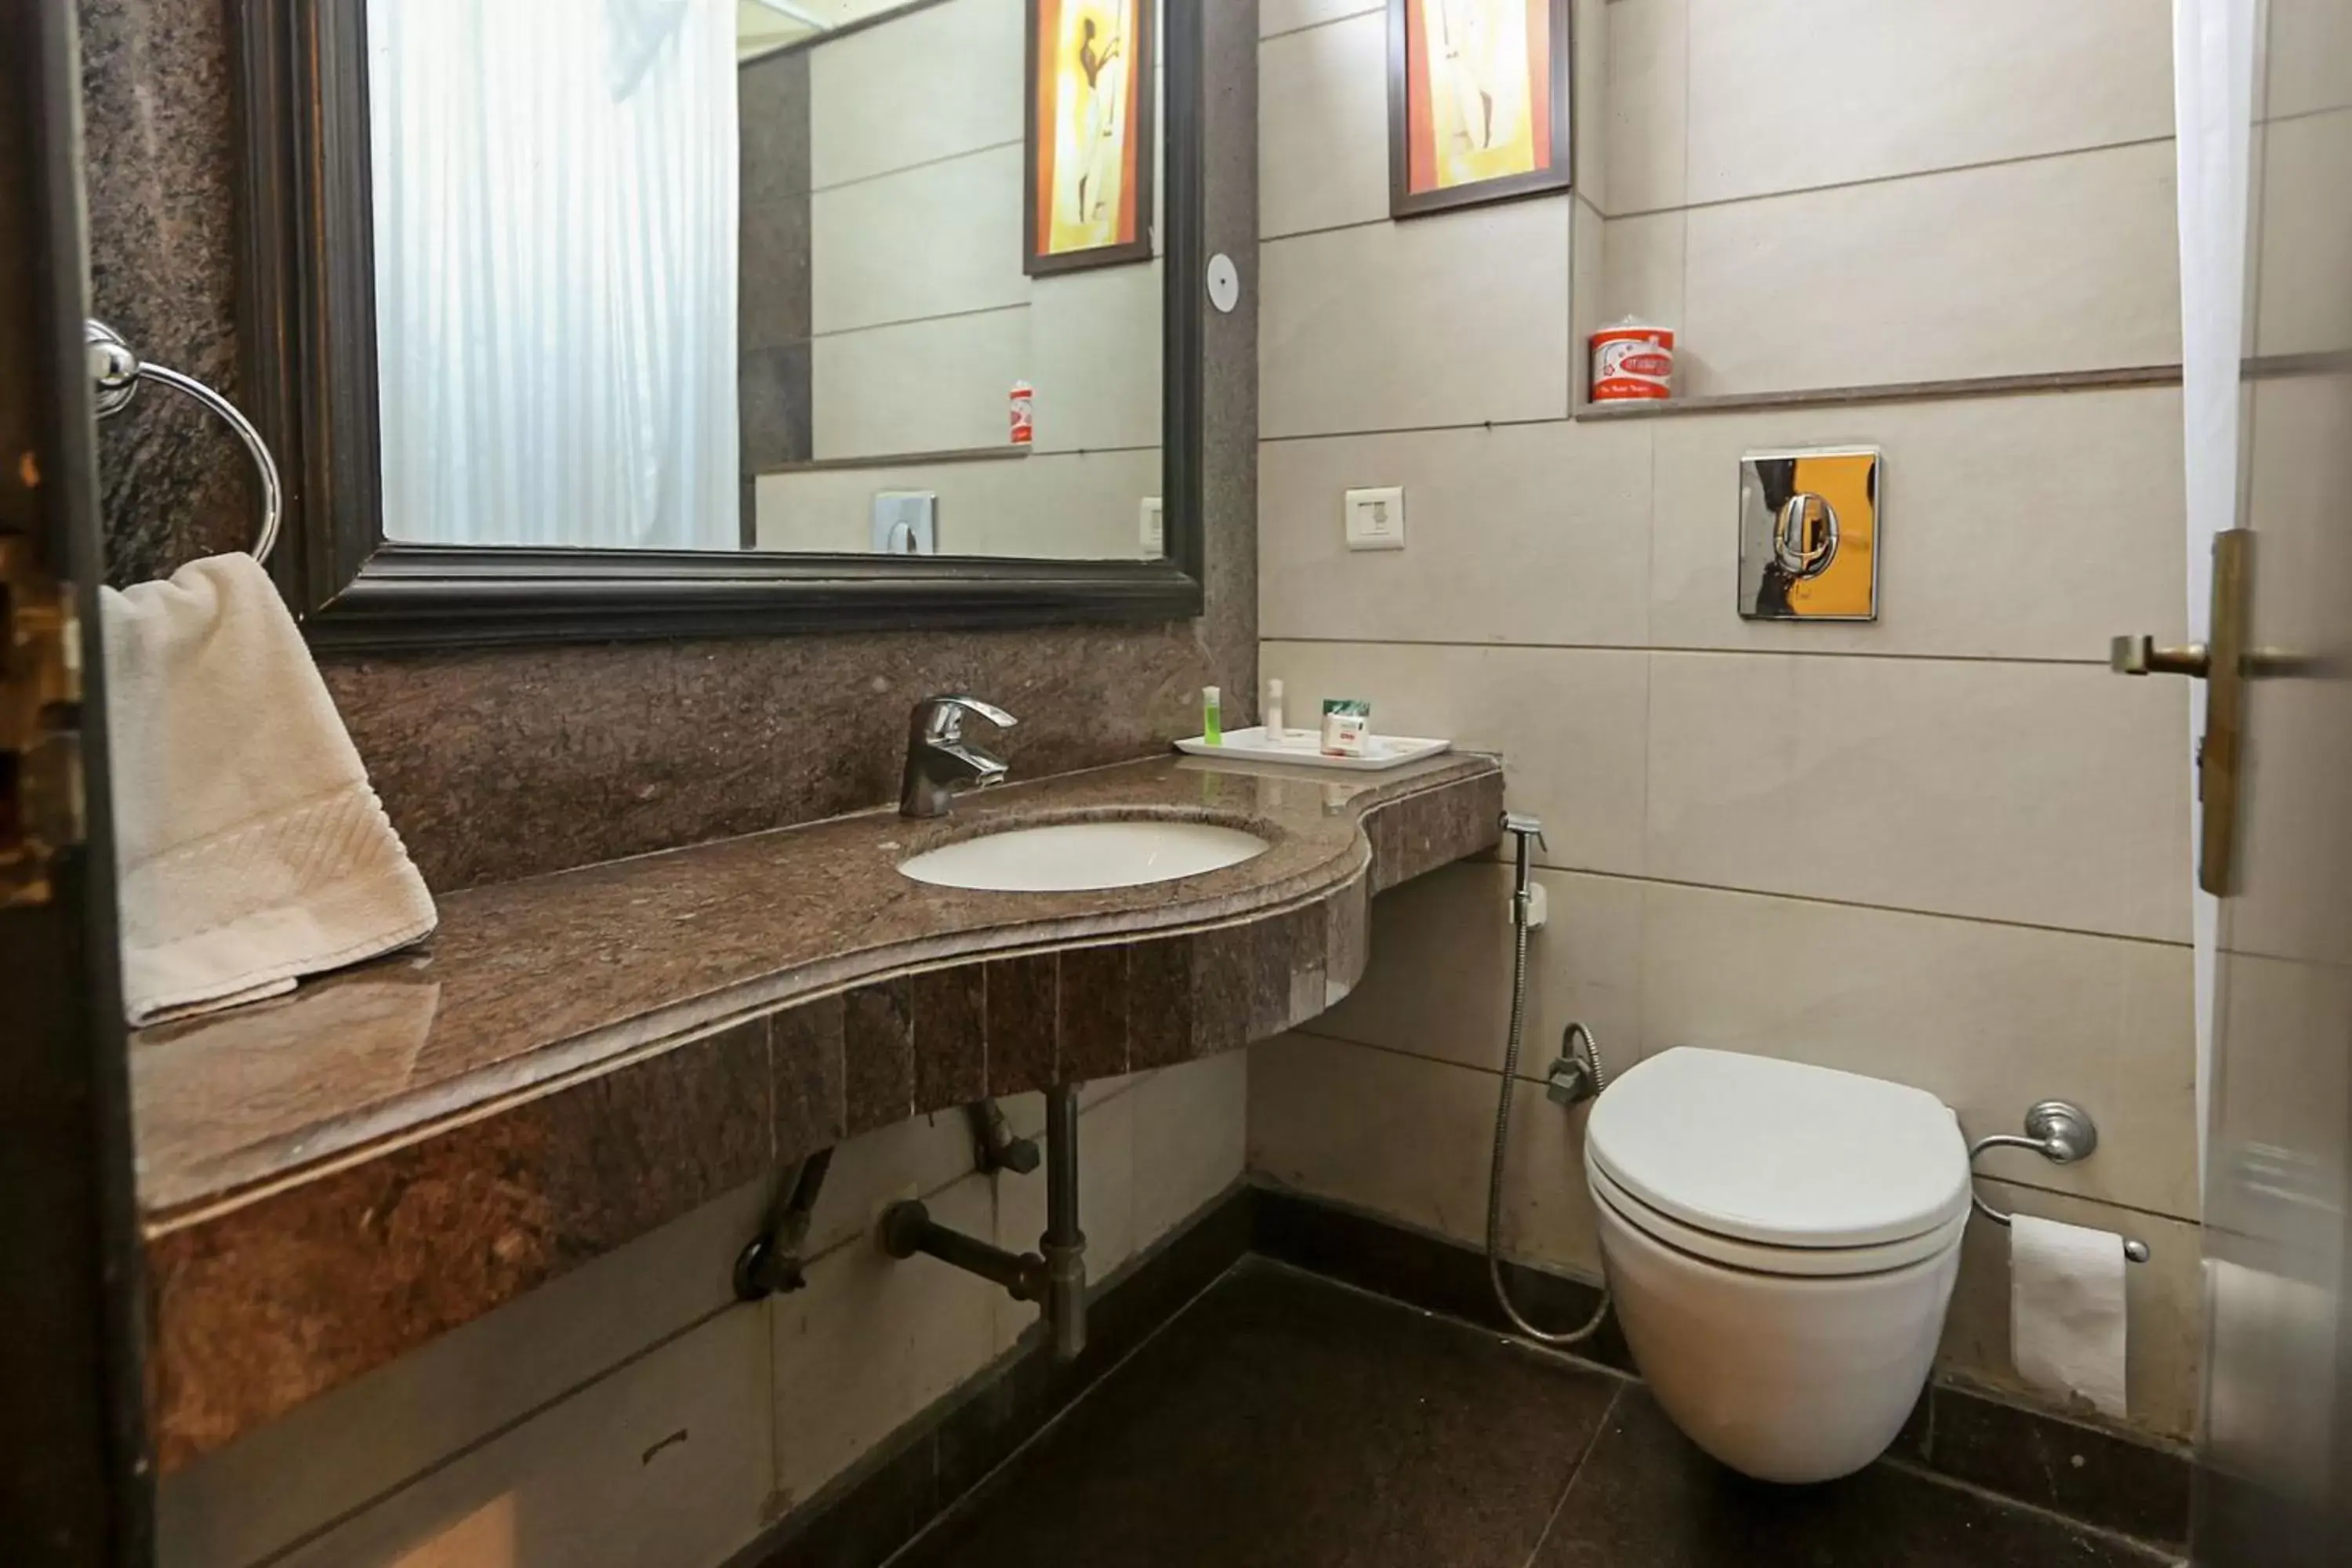 Bathroom in The Oakland Plaza by Orion Hotels